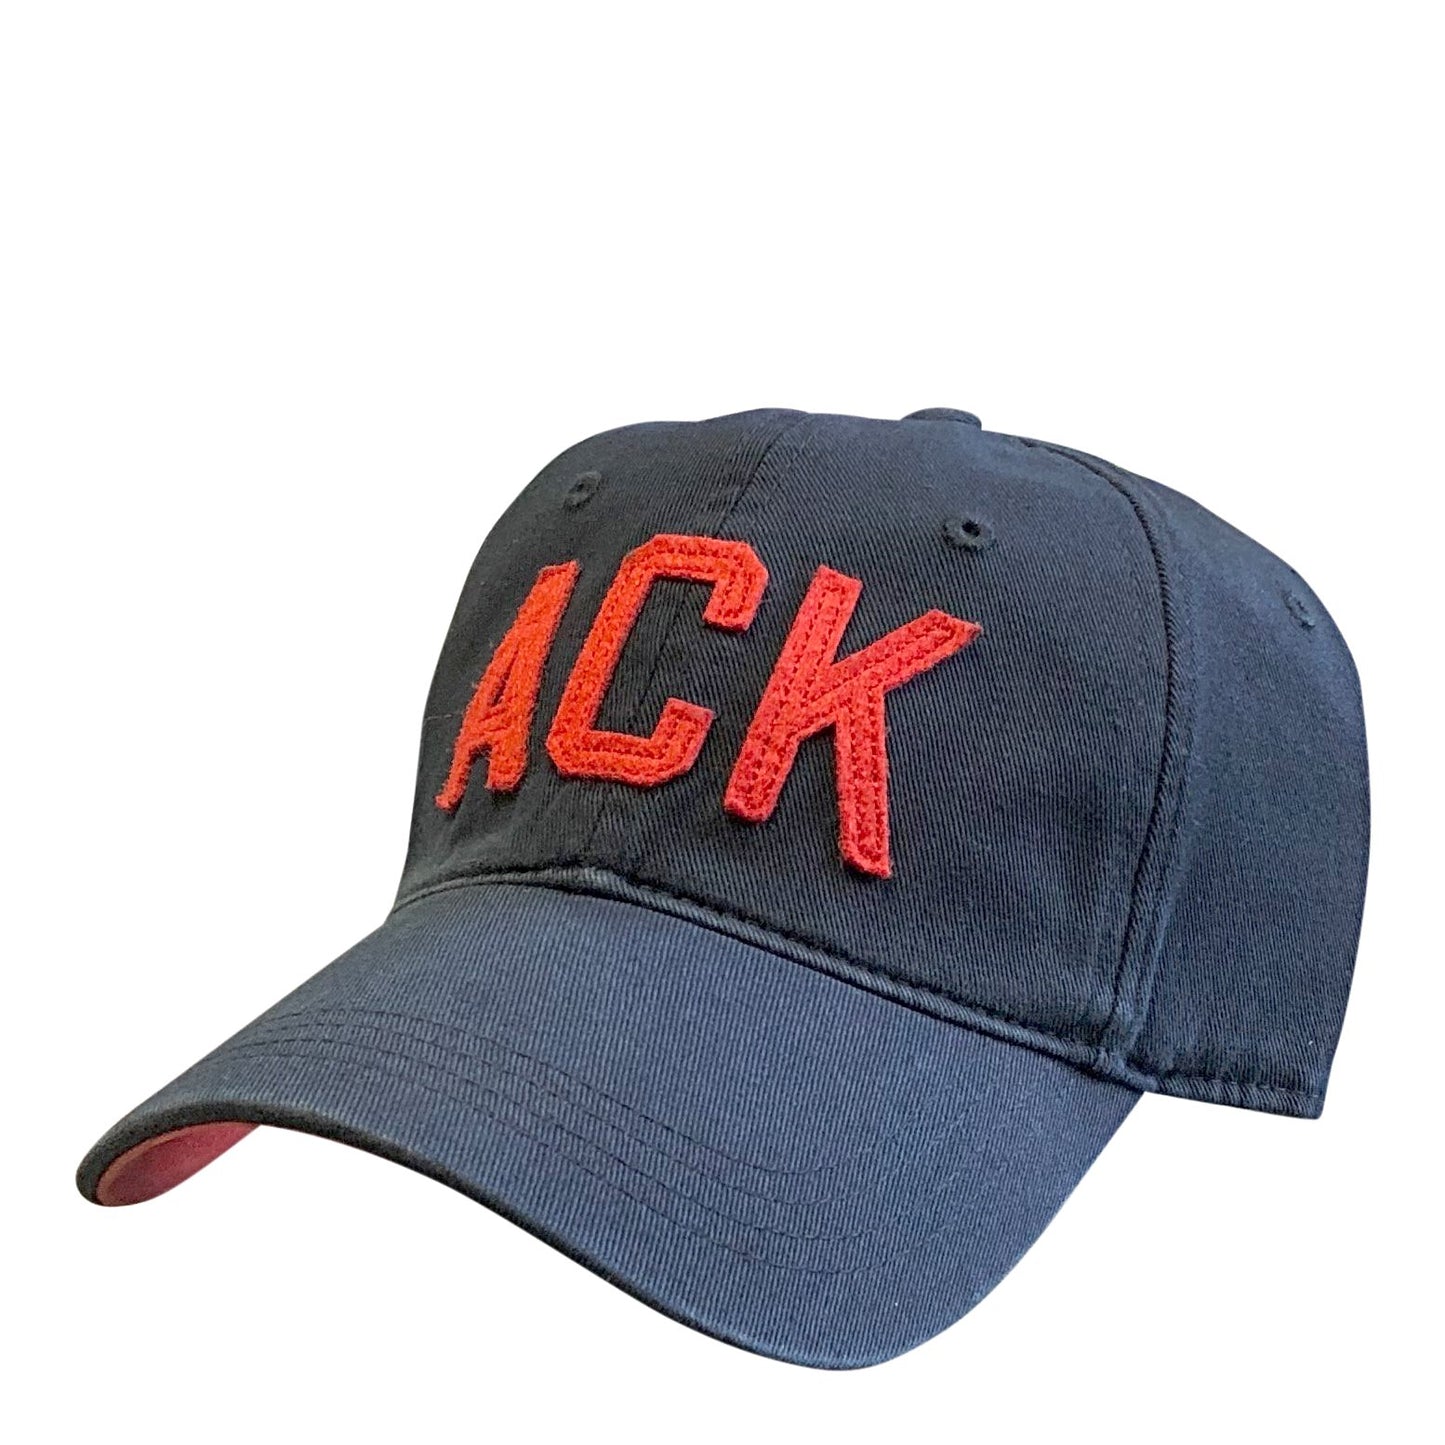 ACK Nantucket Island Applique Washed Twill Hat